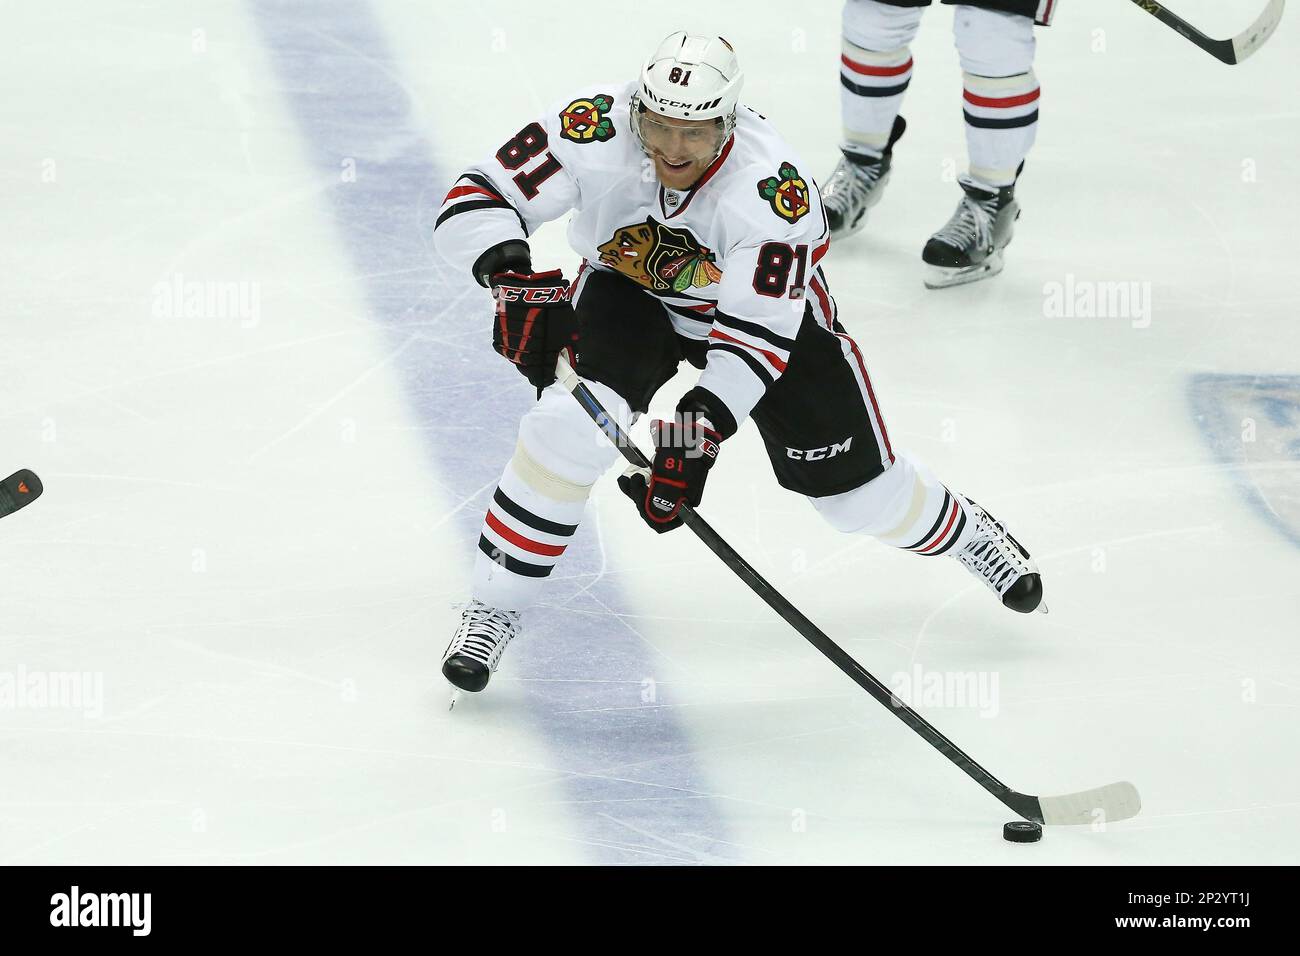 Marian Hossa still a force at both ends of ice